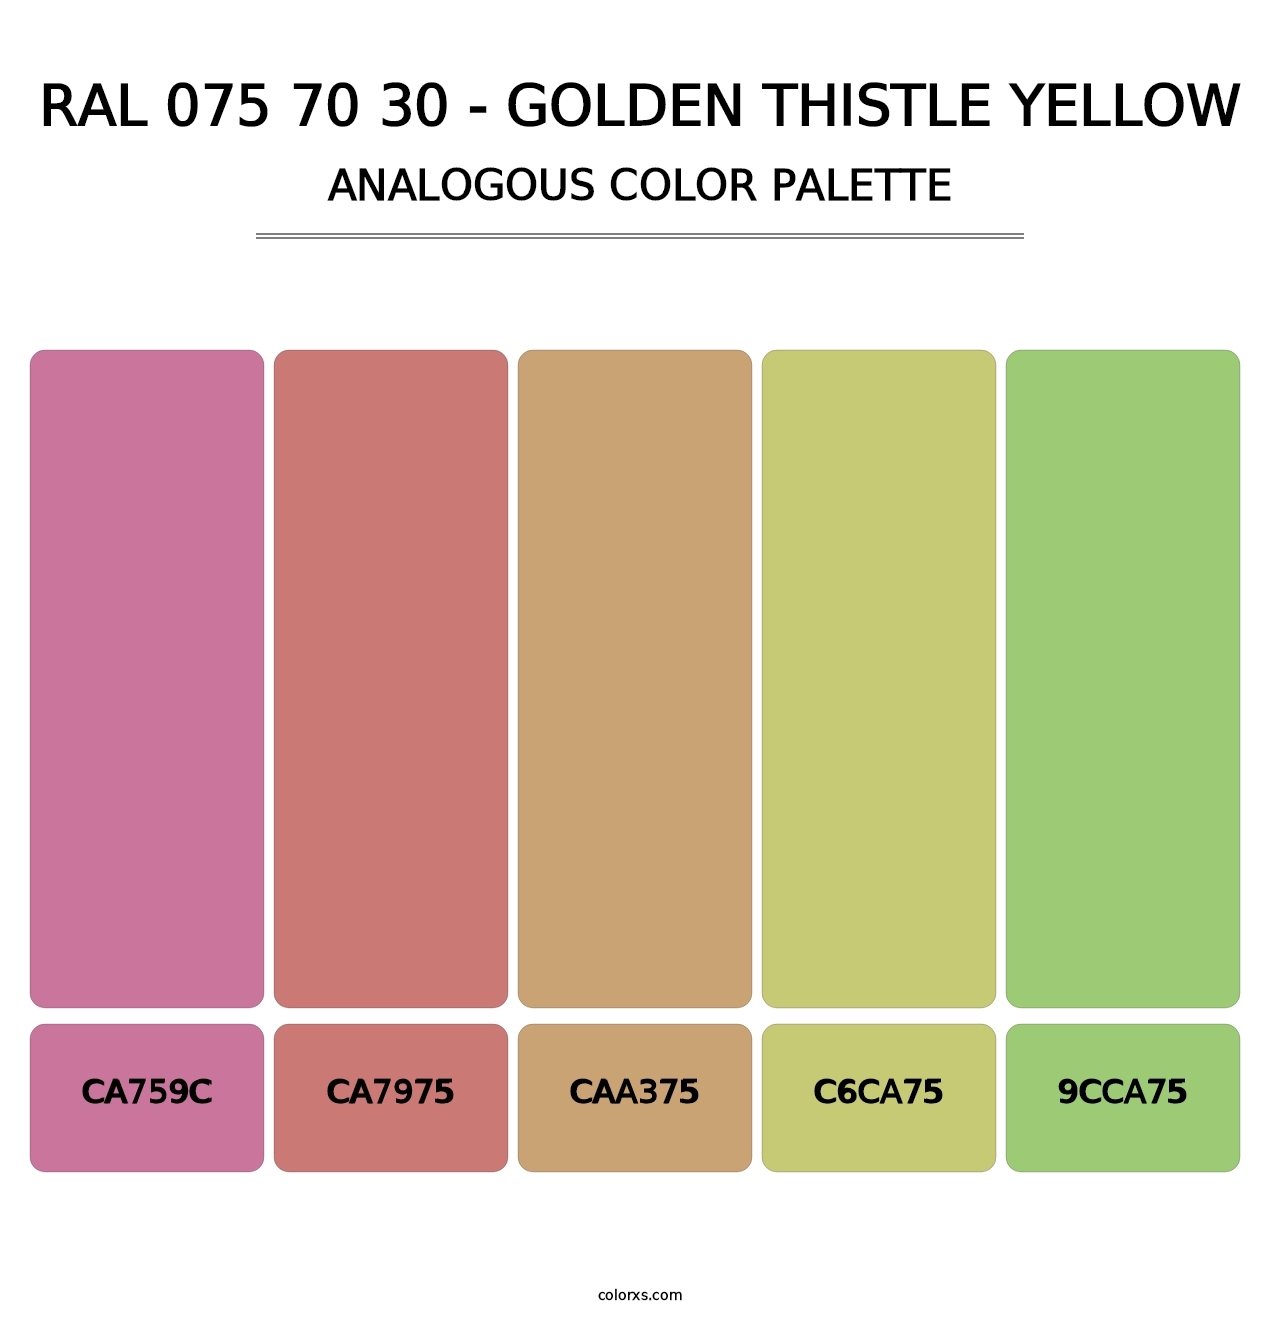 RAL 075 70 30 - Golden Thistle Yellow - Analogous Color Palette